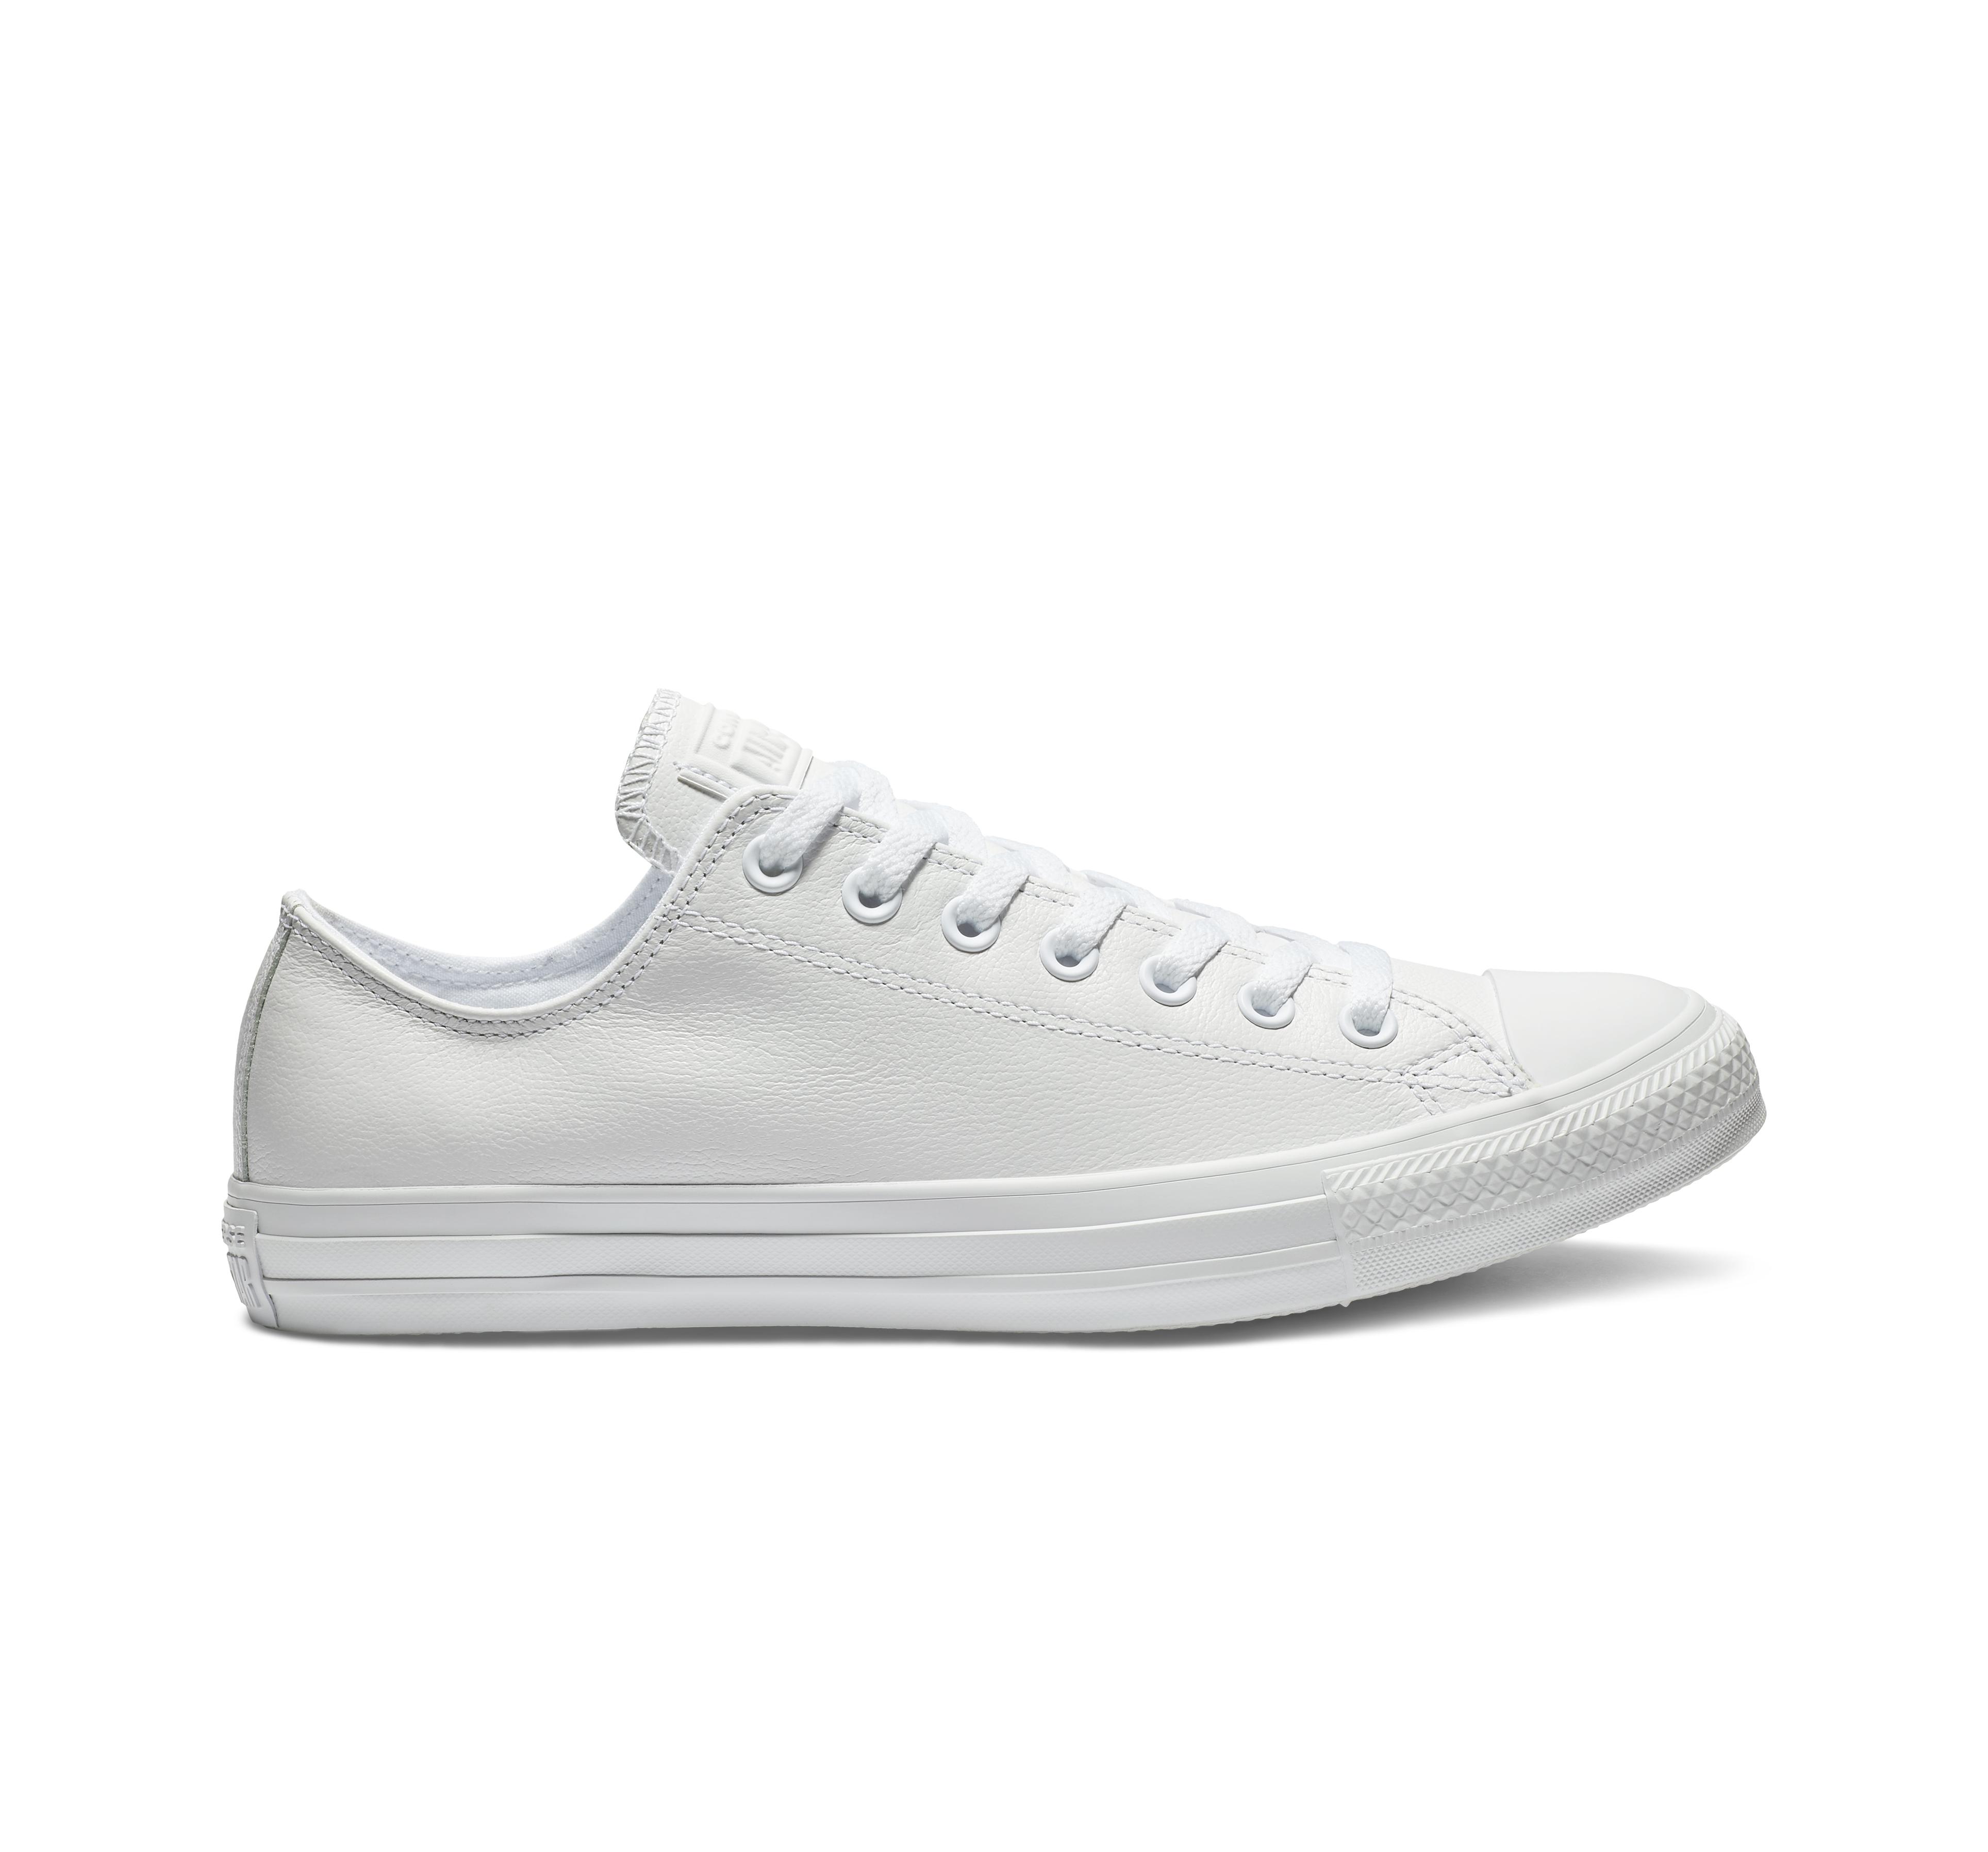 Converse Chuck Taylor All Star Leather in White for Men - Lyst